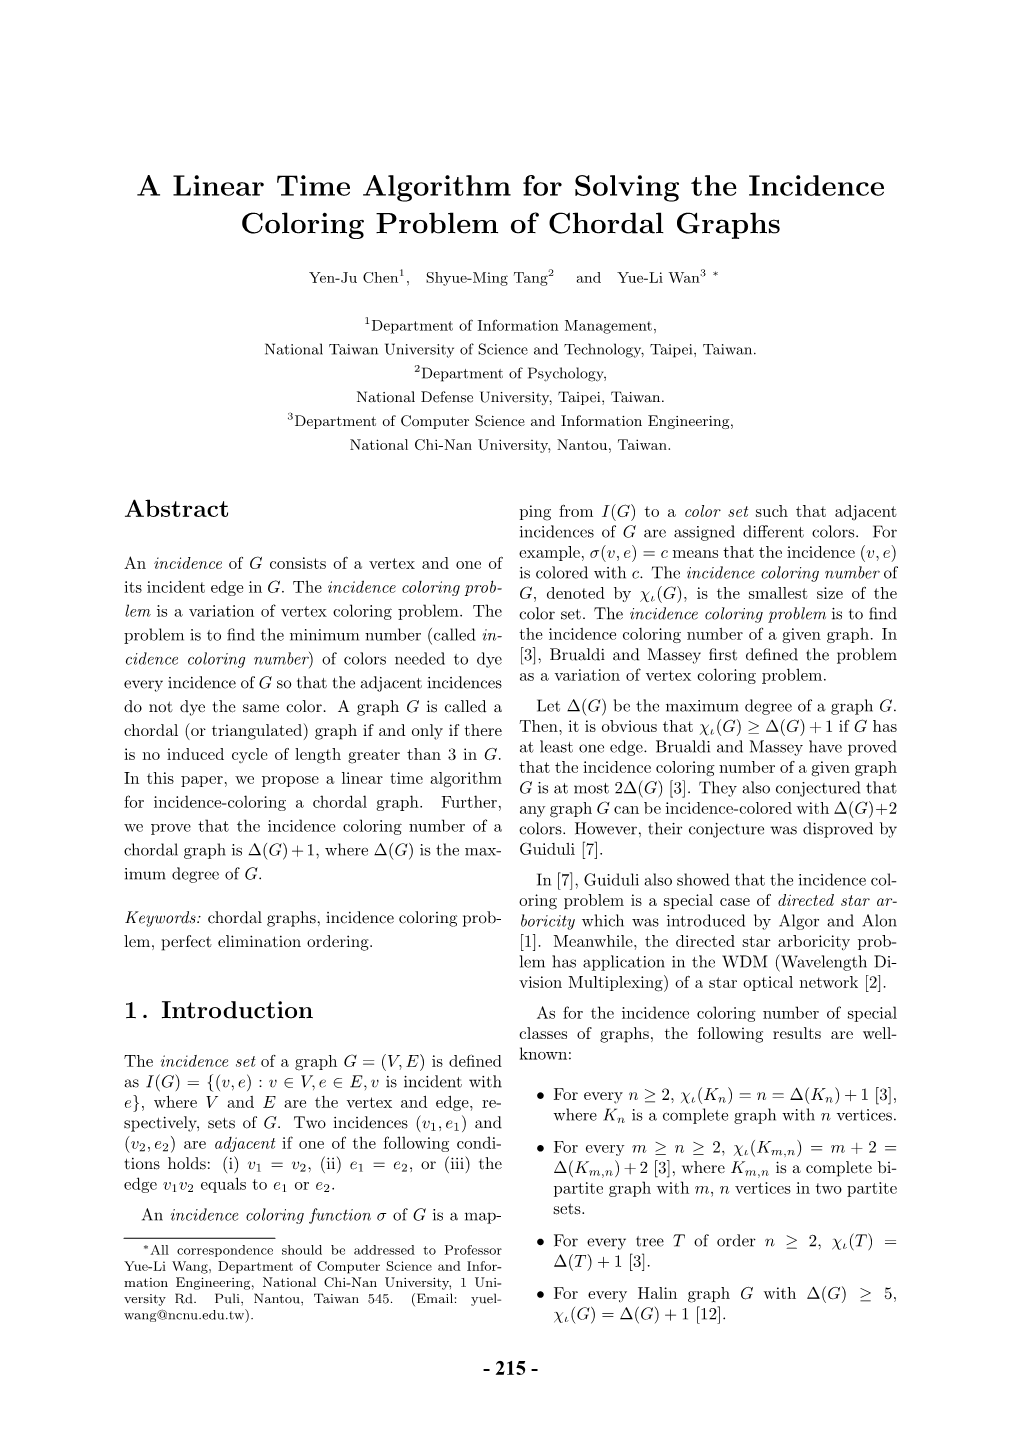 A Linear Time Algorithm for Solving the Incidence Coloring Problem of Chordal Graphs